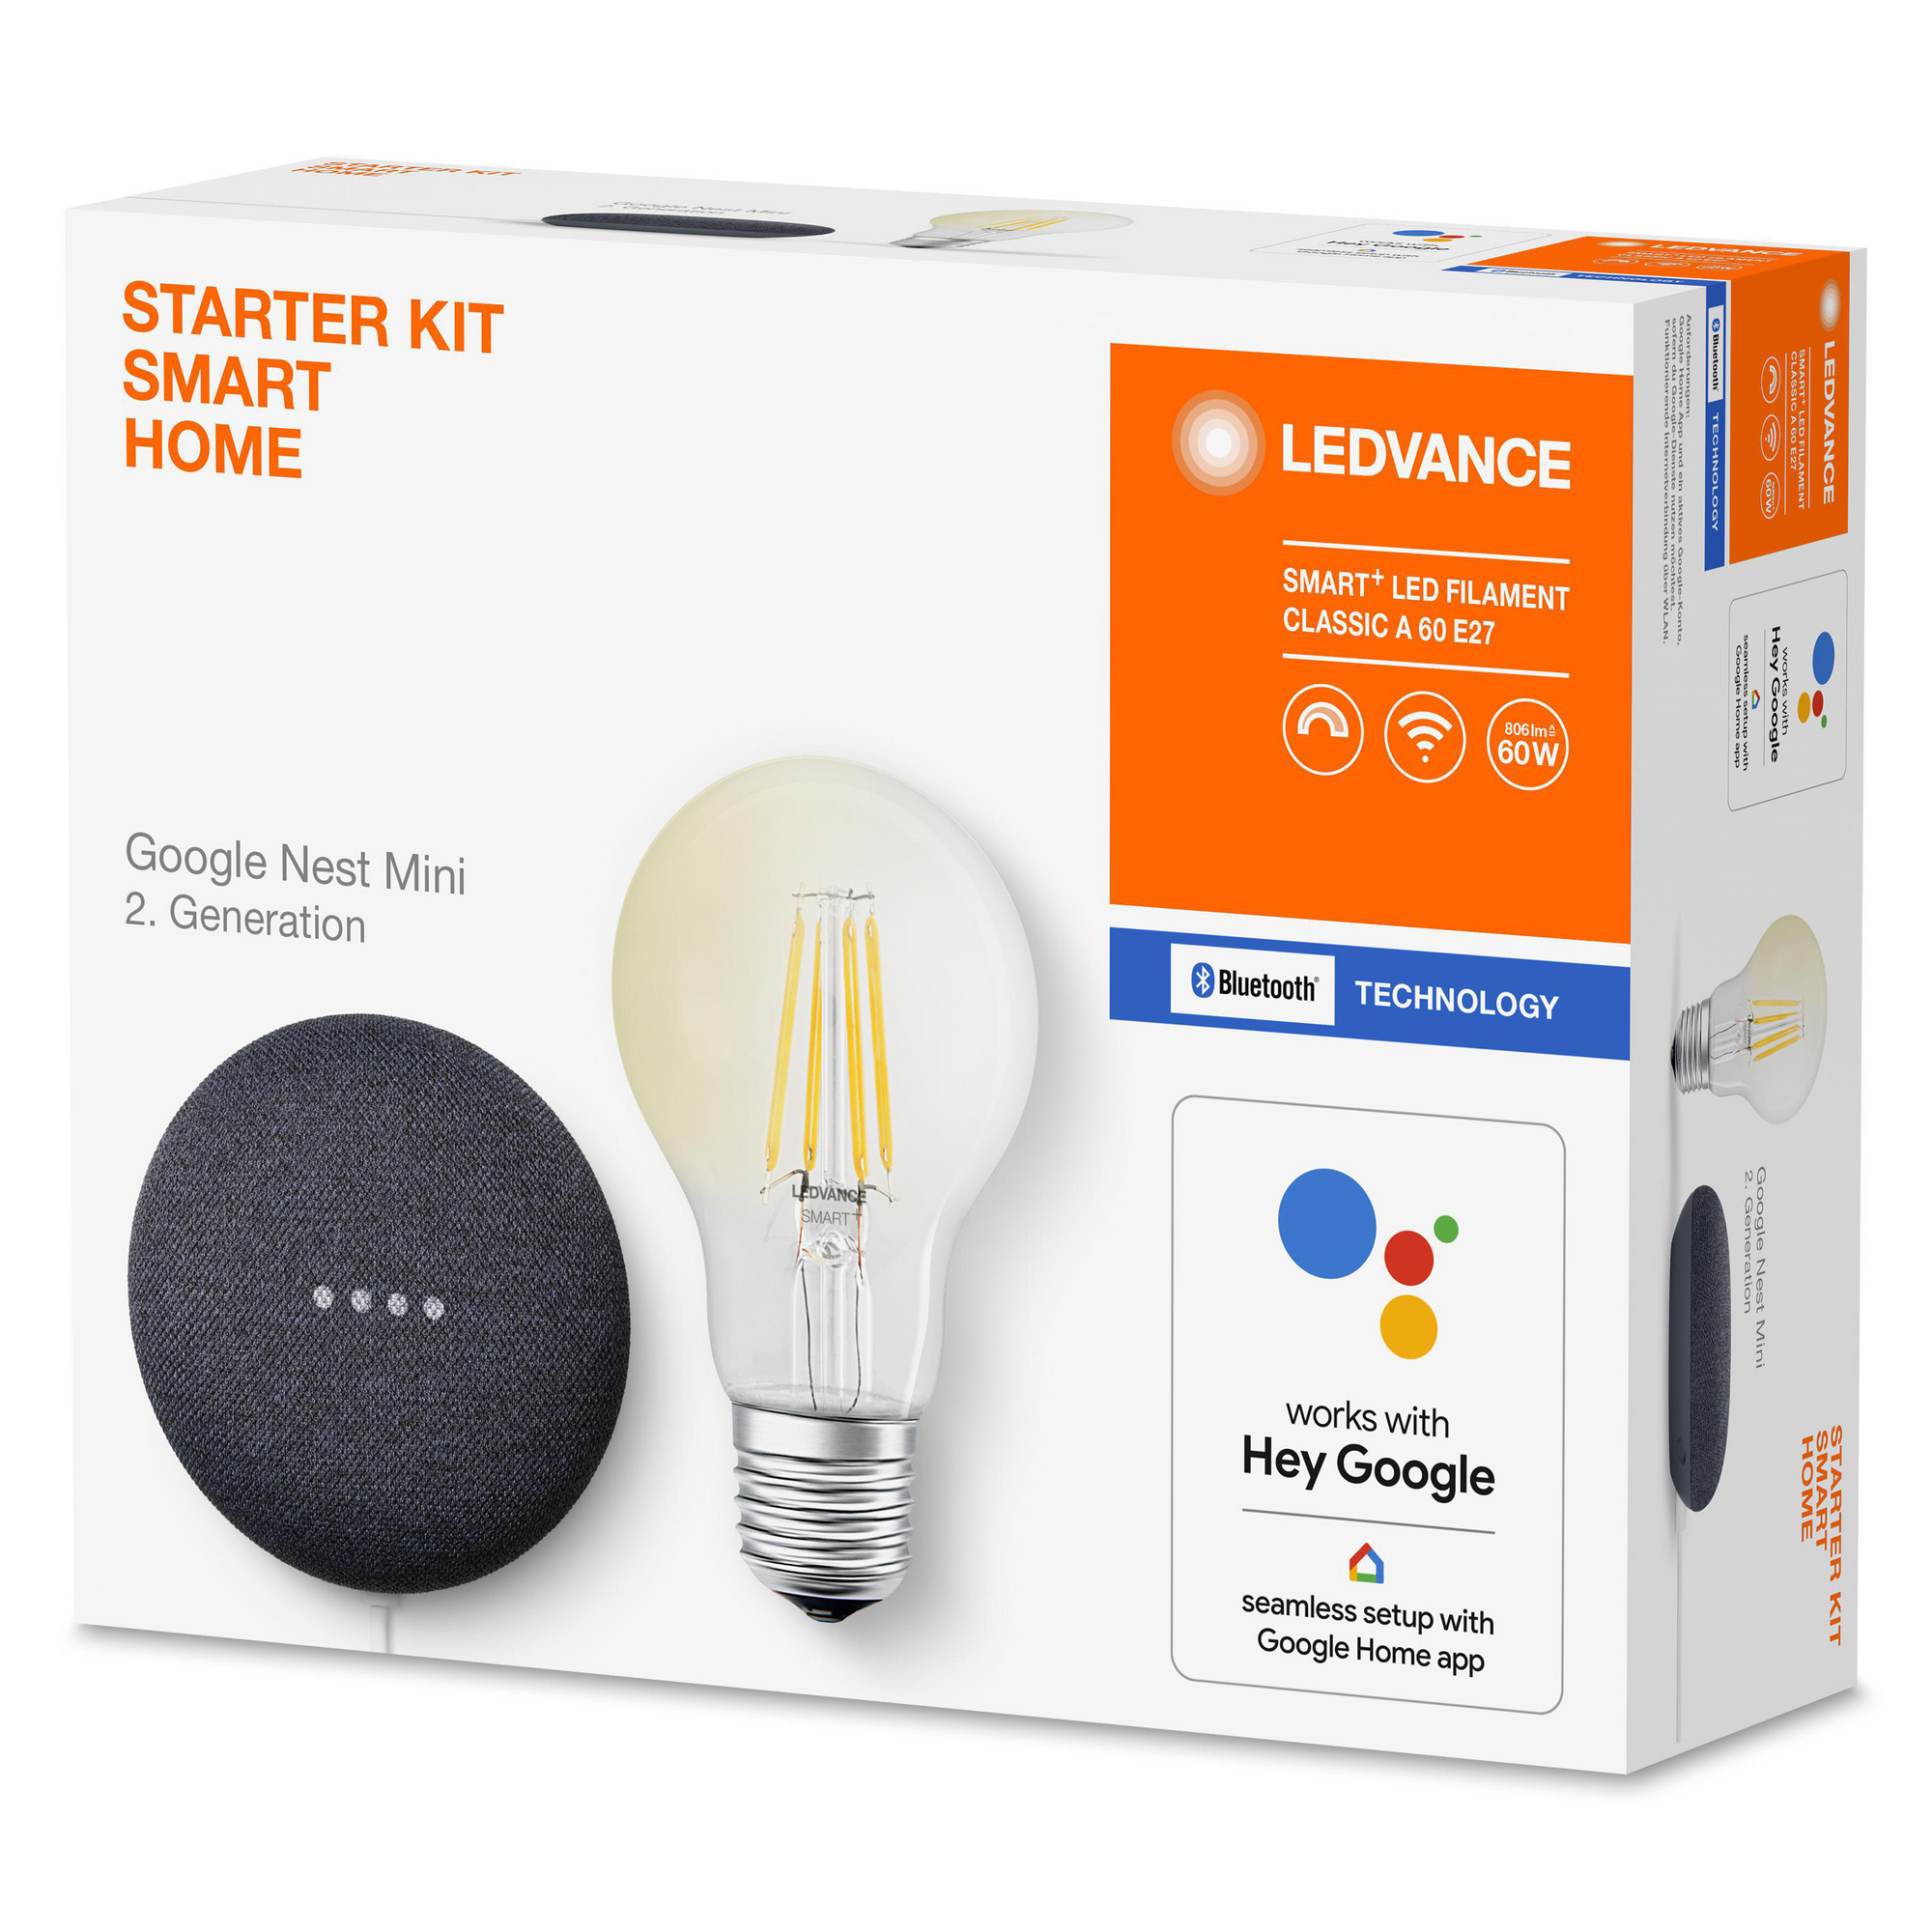 Smart Home-Starter-Kit 'Smart+' Bluetooth + product picture